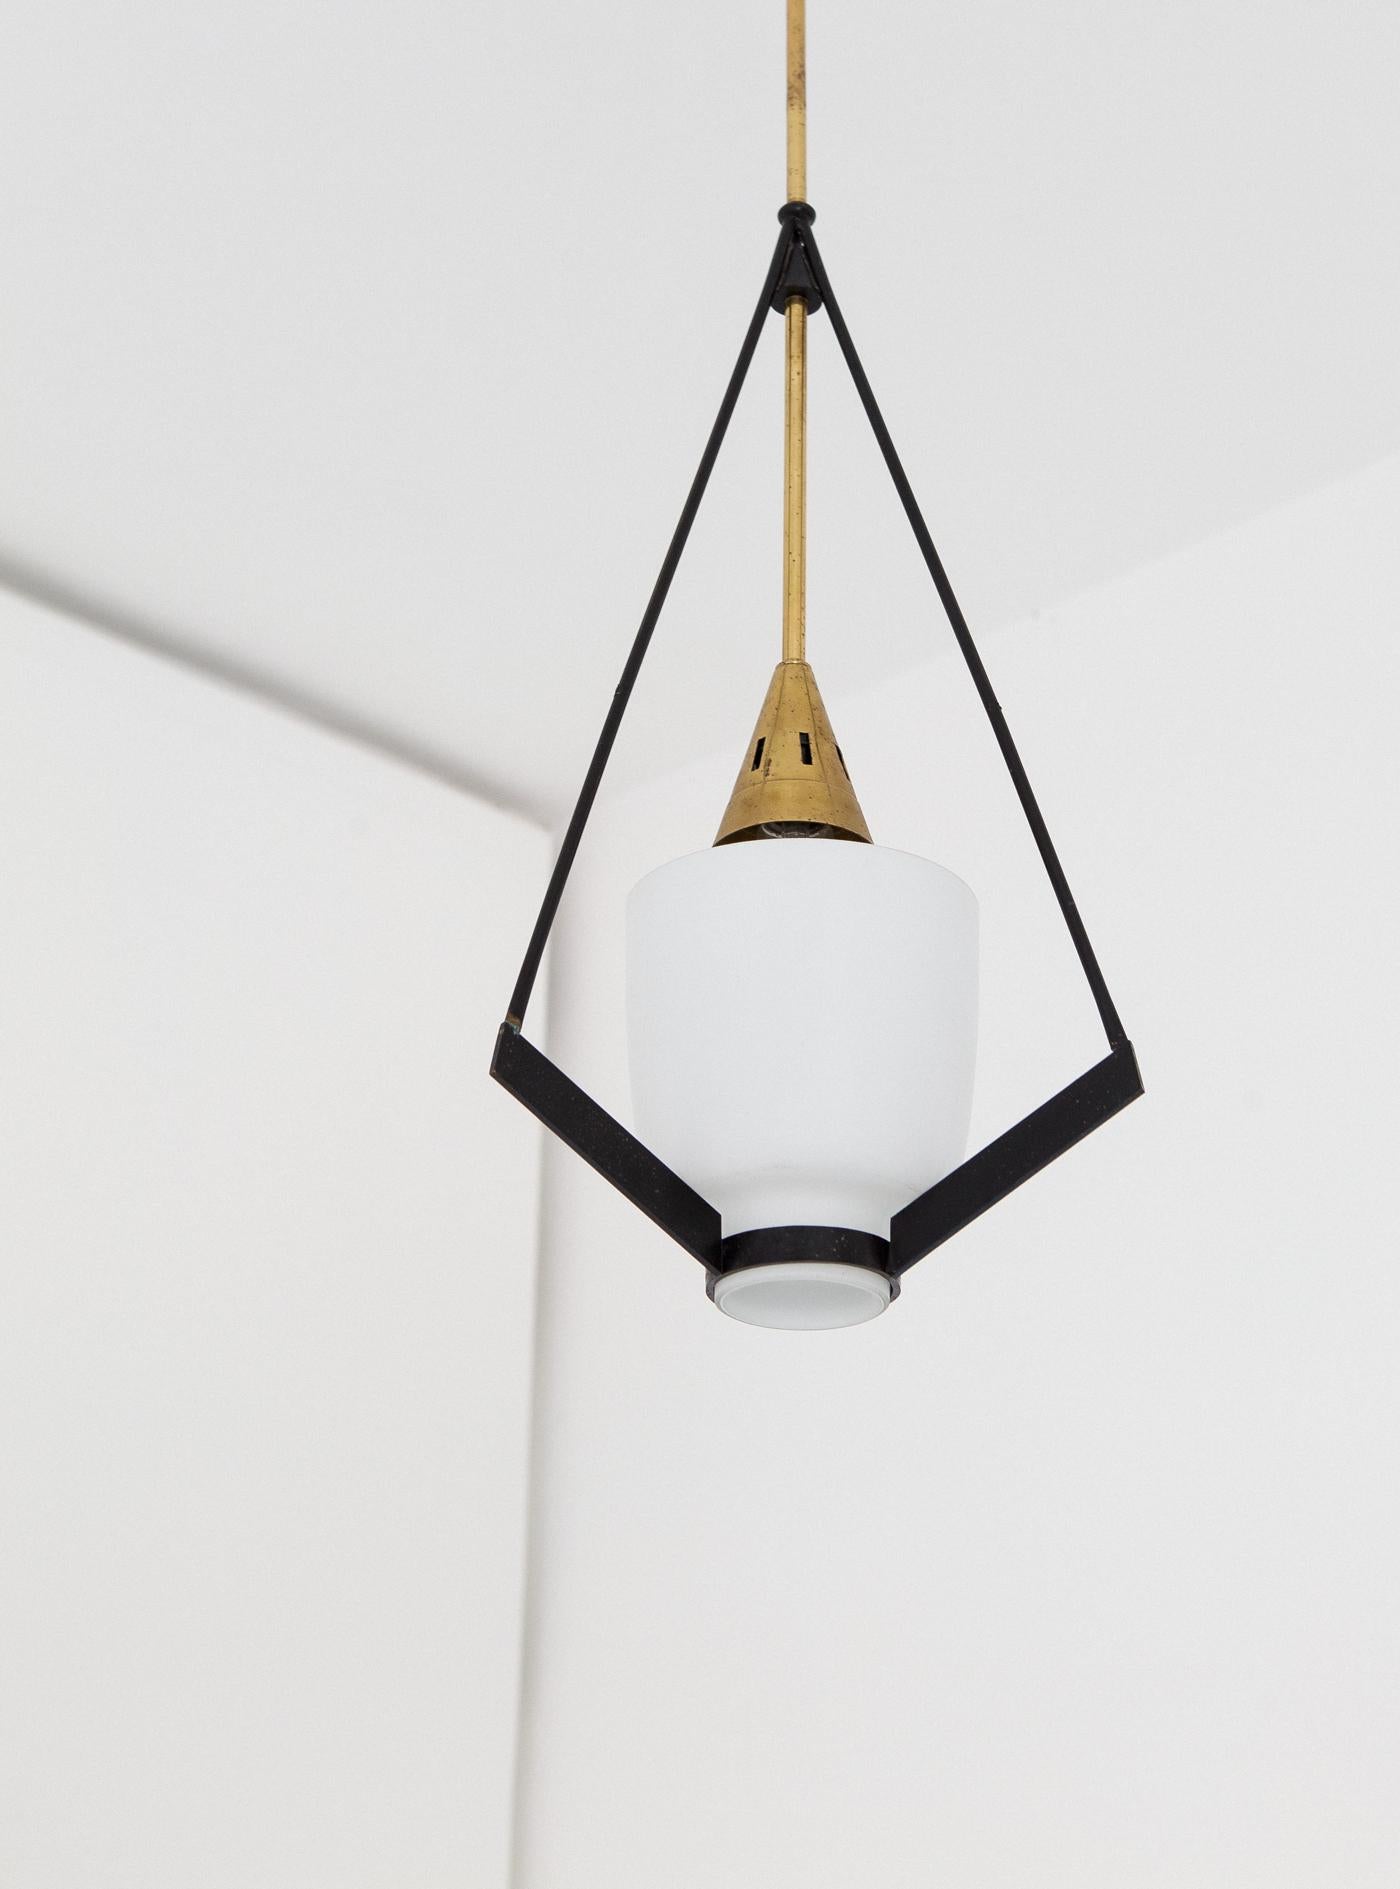 Mid-Century Modern pendant lamp manufactured in Italy during the 1950s.
The ceiling light feature black enameled iron with opaline glass and also brass parts
Original working wire with standard E27 bulbs, you can request to replace the original